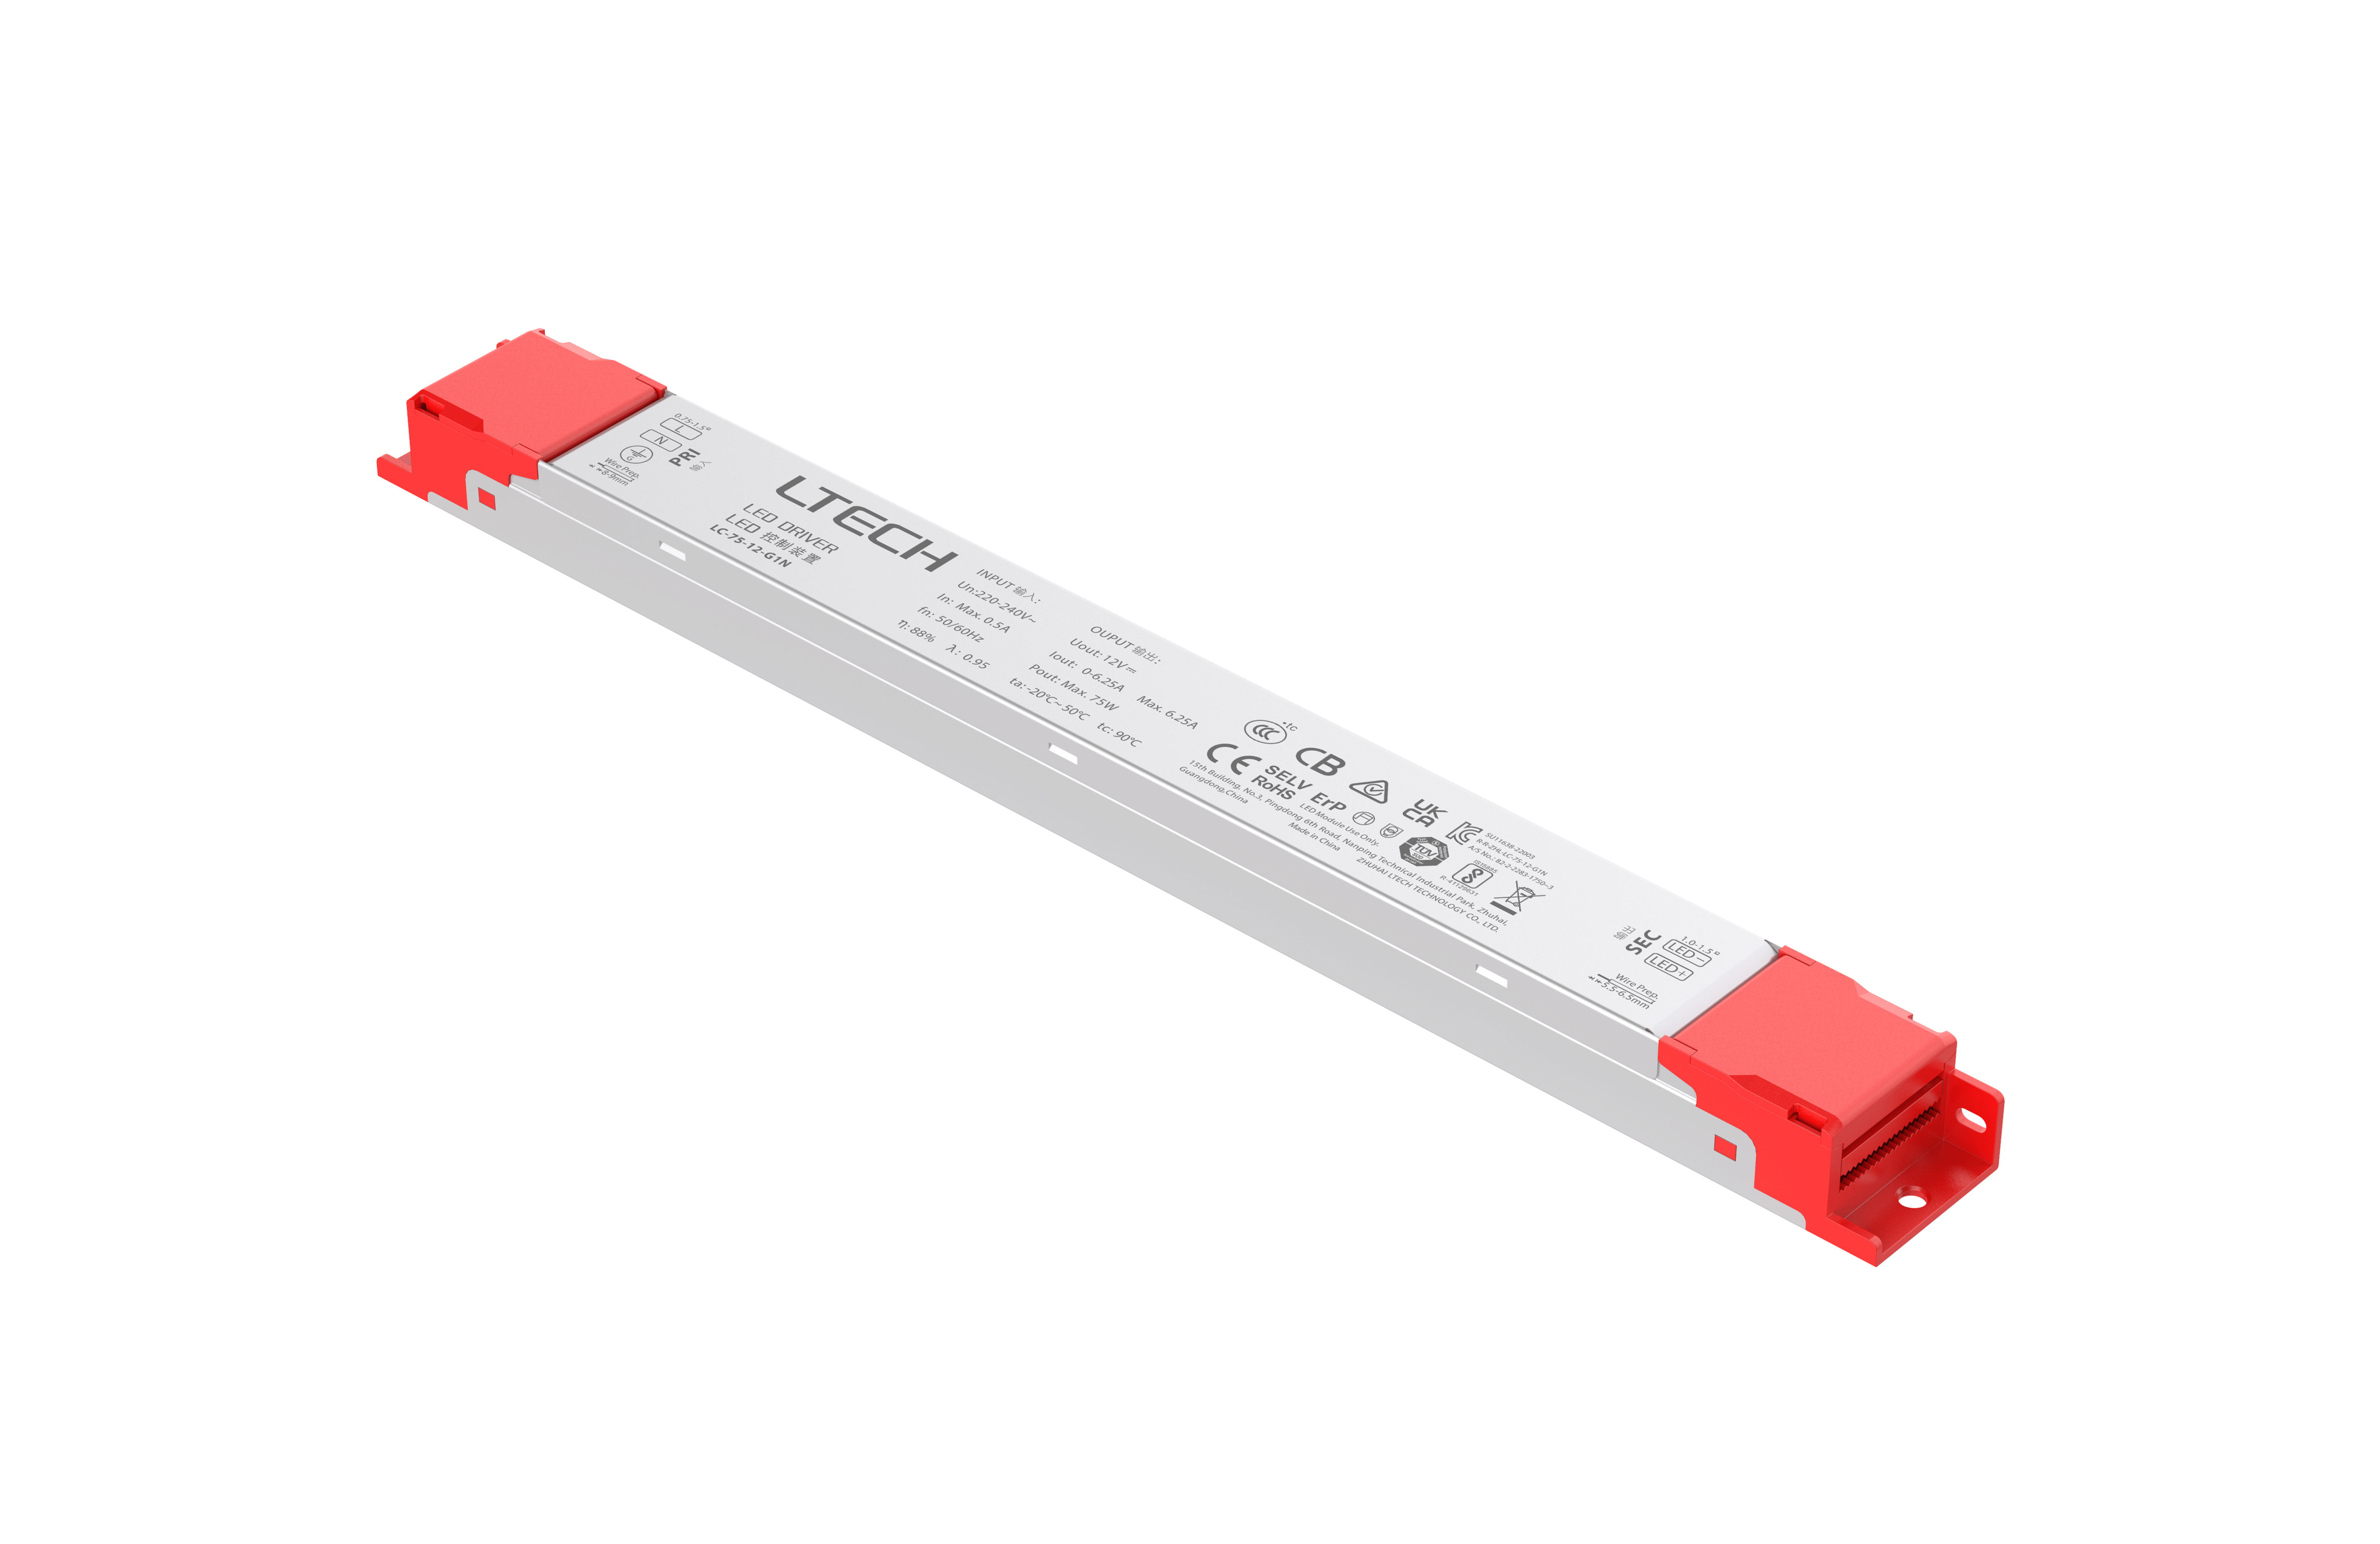 LC-75-12-G1N  Intelligent Constant Voltage  LED Driver, ON/OFF, 75W, 12VDC 6.25A , 220-240Vac, IP20, 5yrs Warrenty.